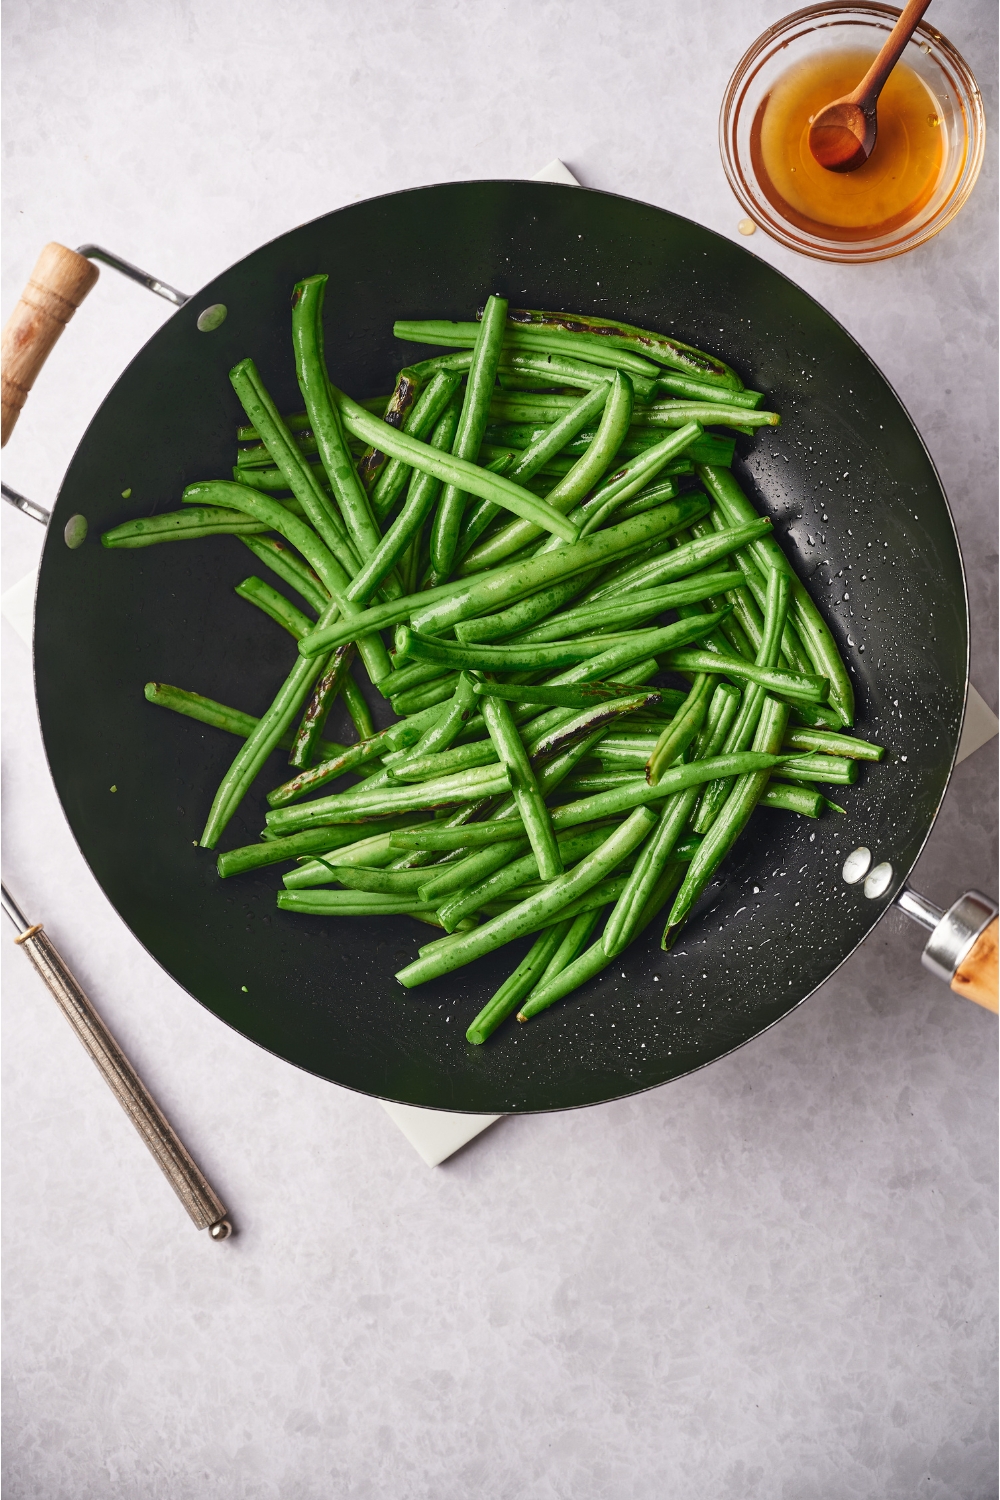 A black skillet with green beans. Next to the skillet is a small bowl of honey.